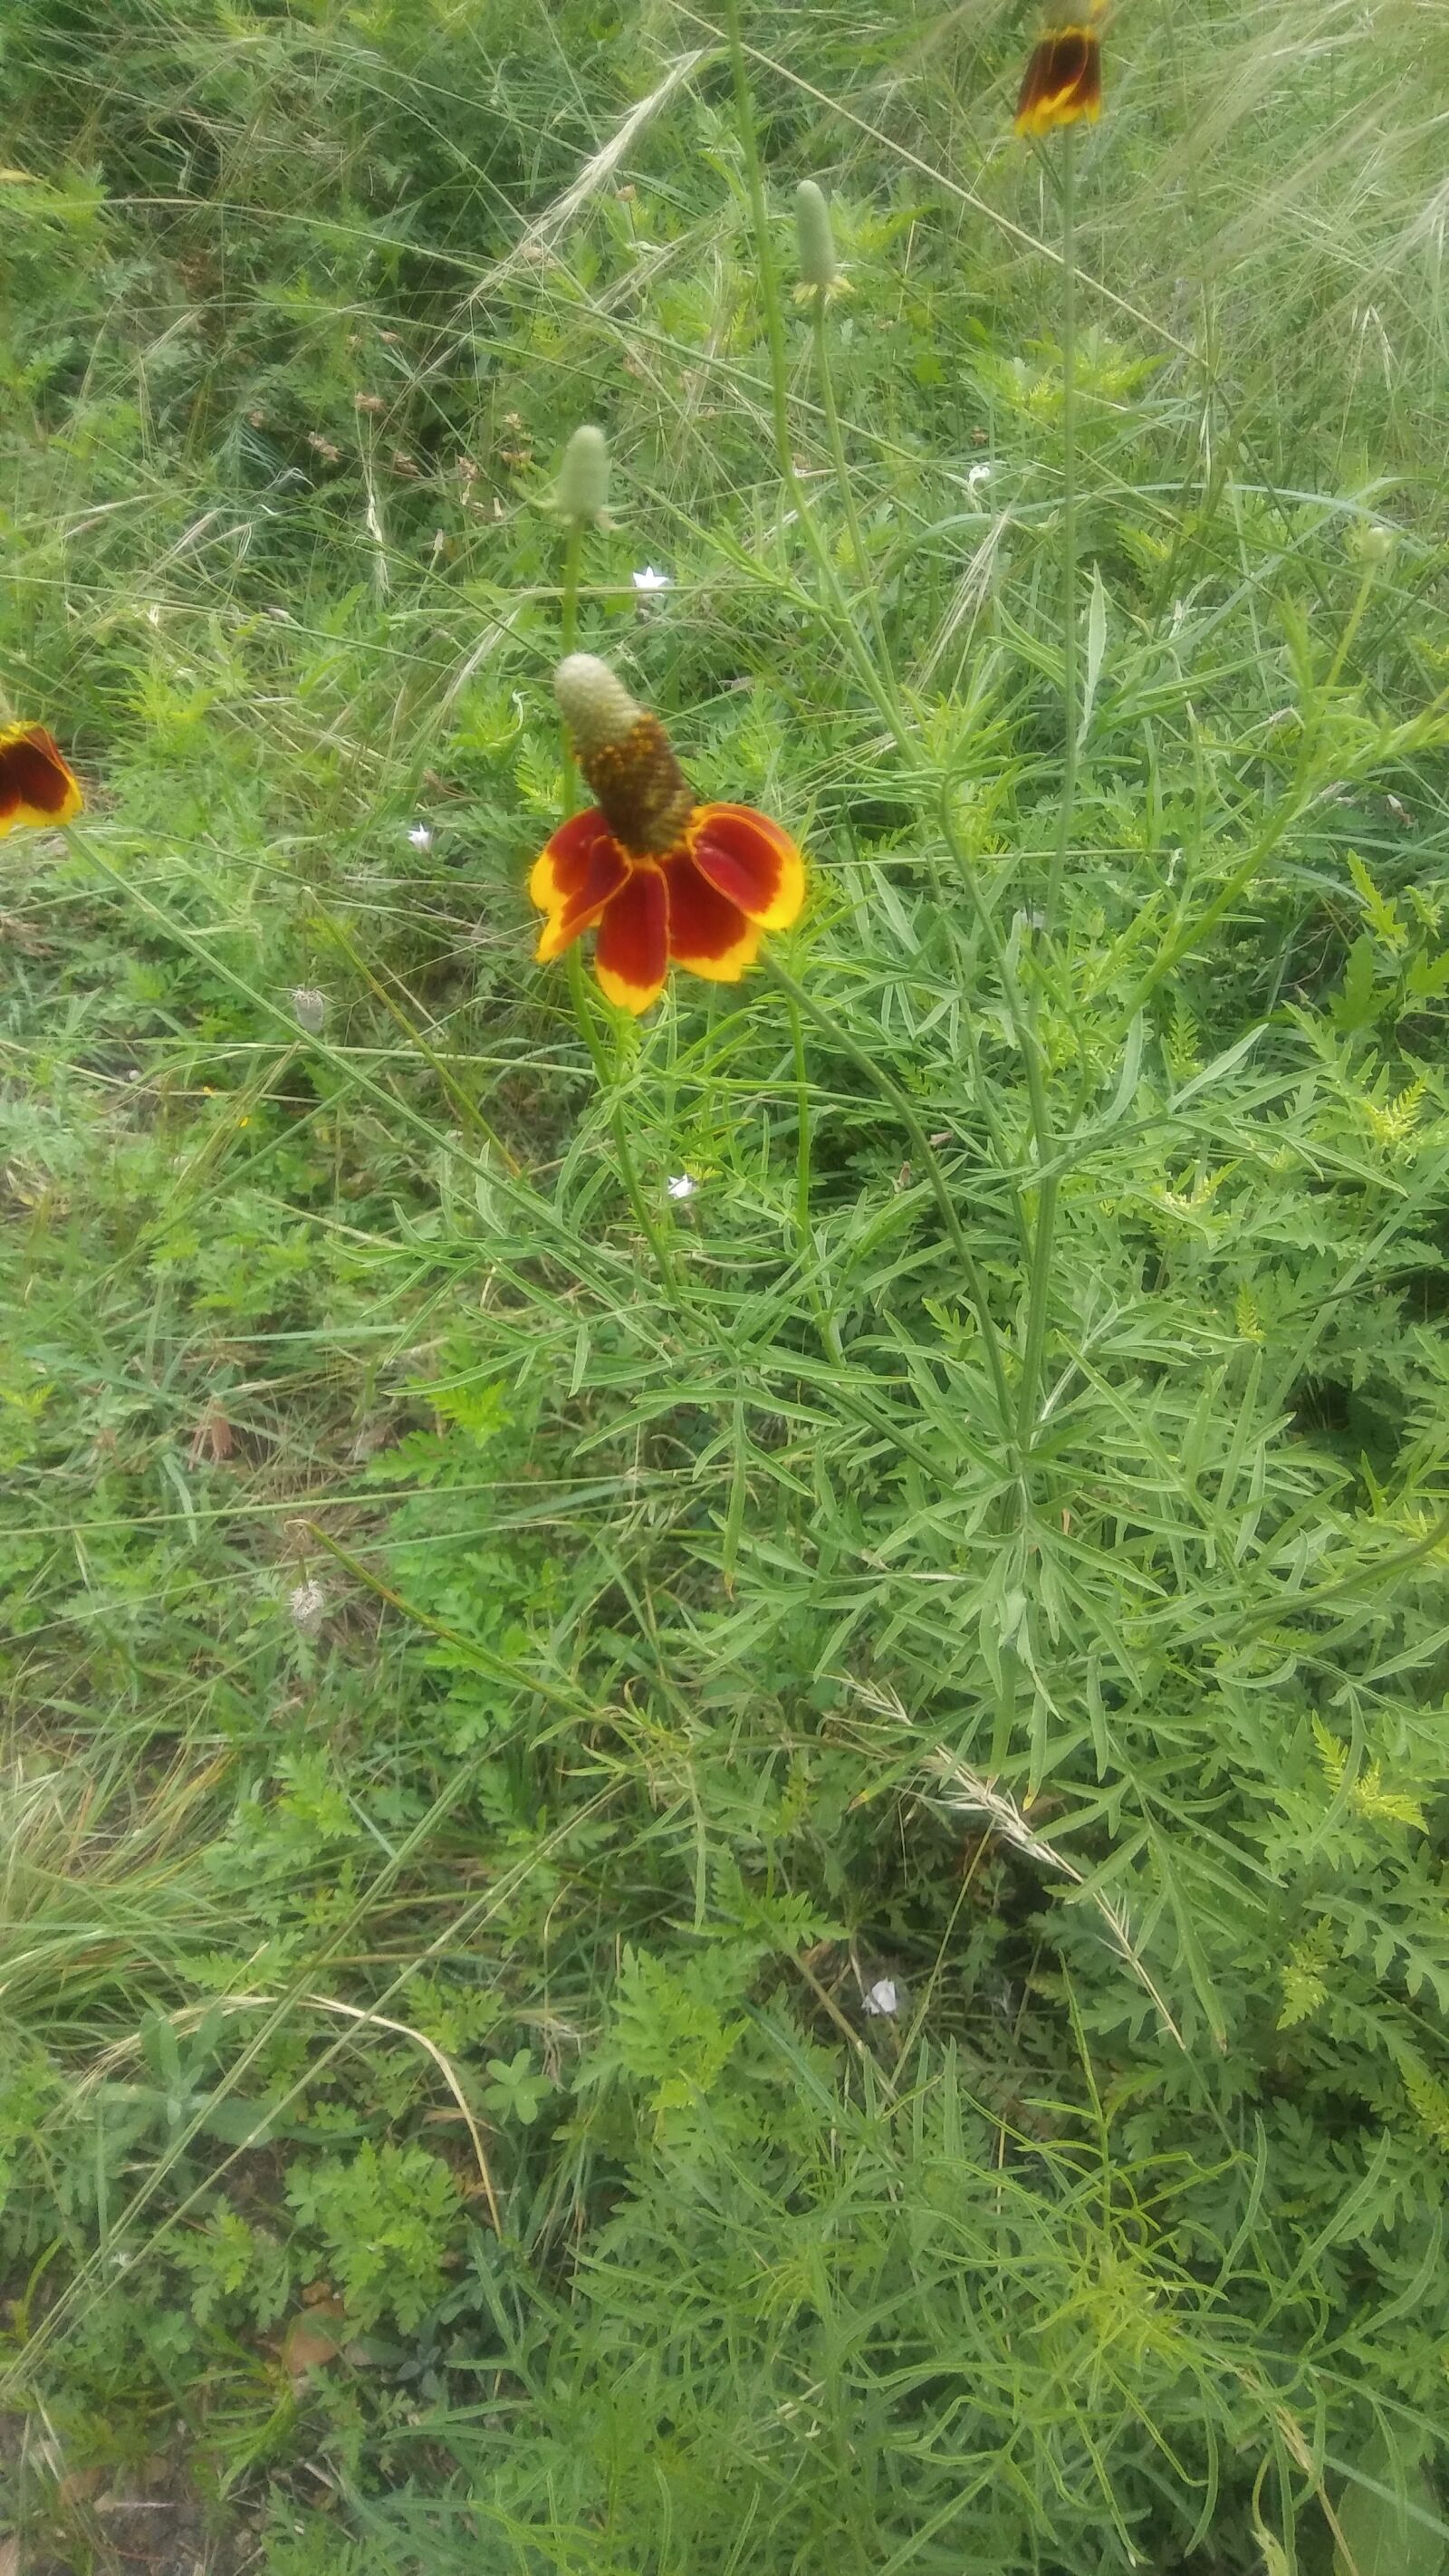 LG STYLO 2 PLUS sample photo. Flower, wildflower, mexican hat photography